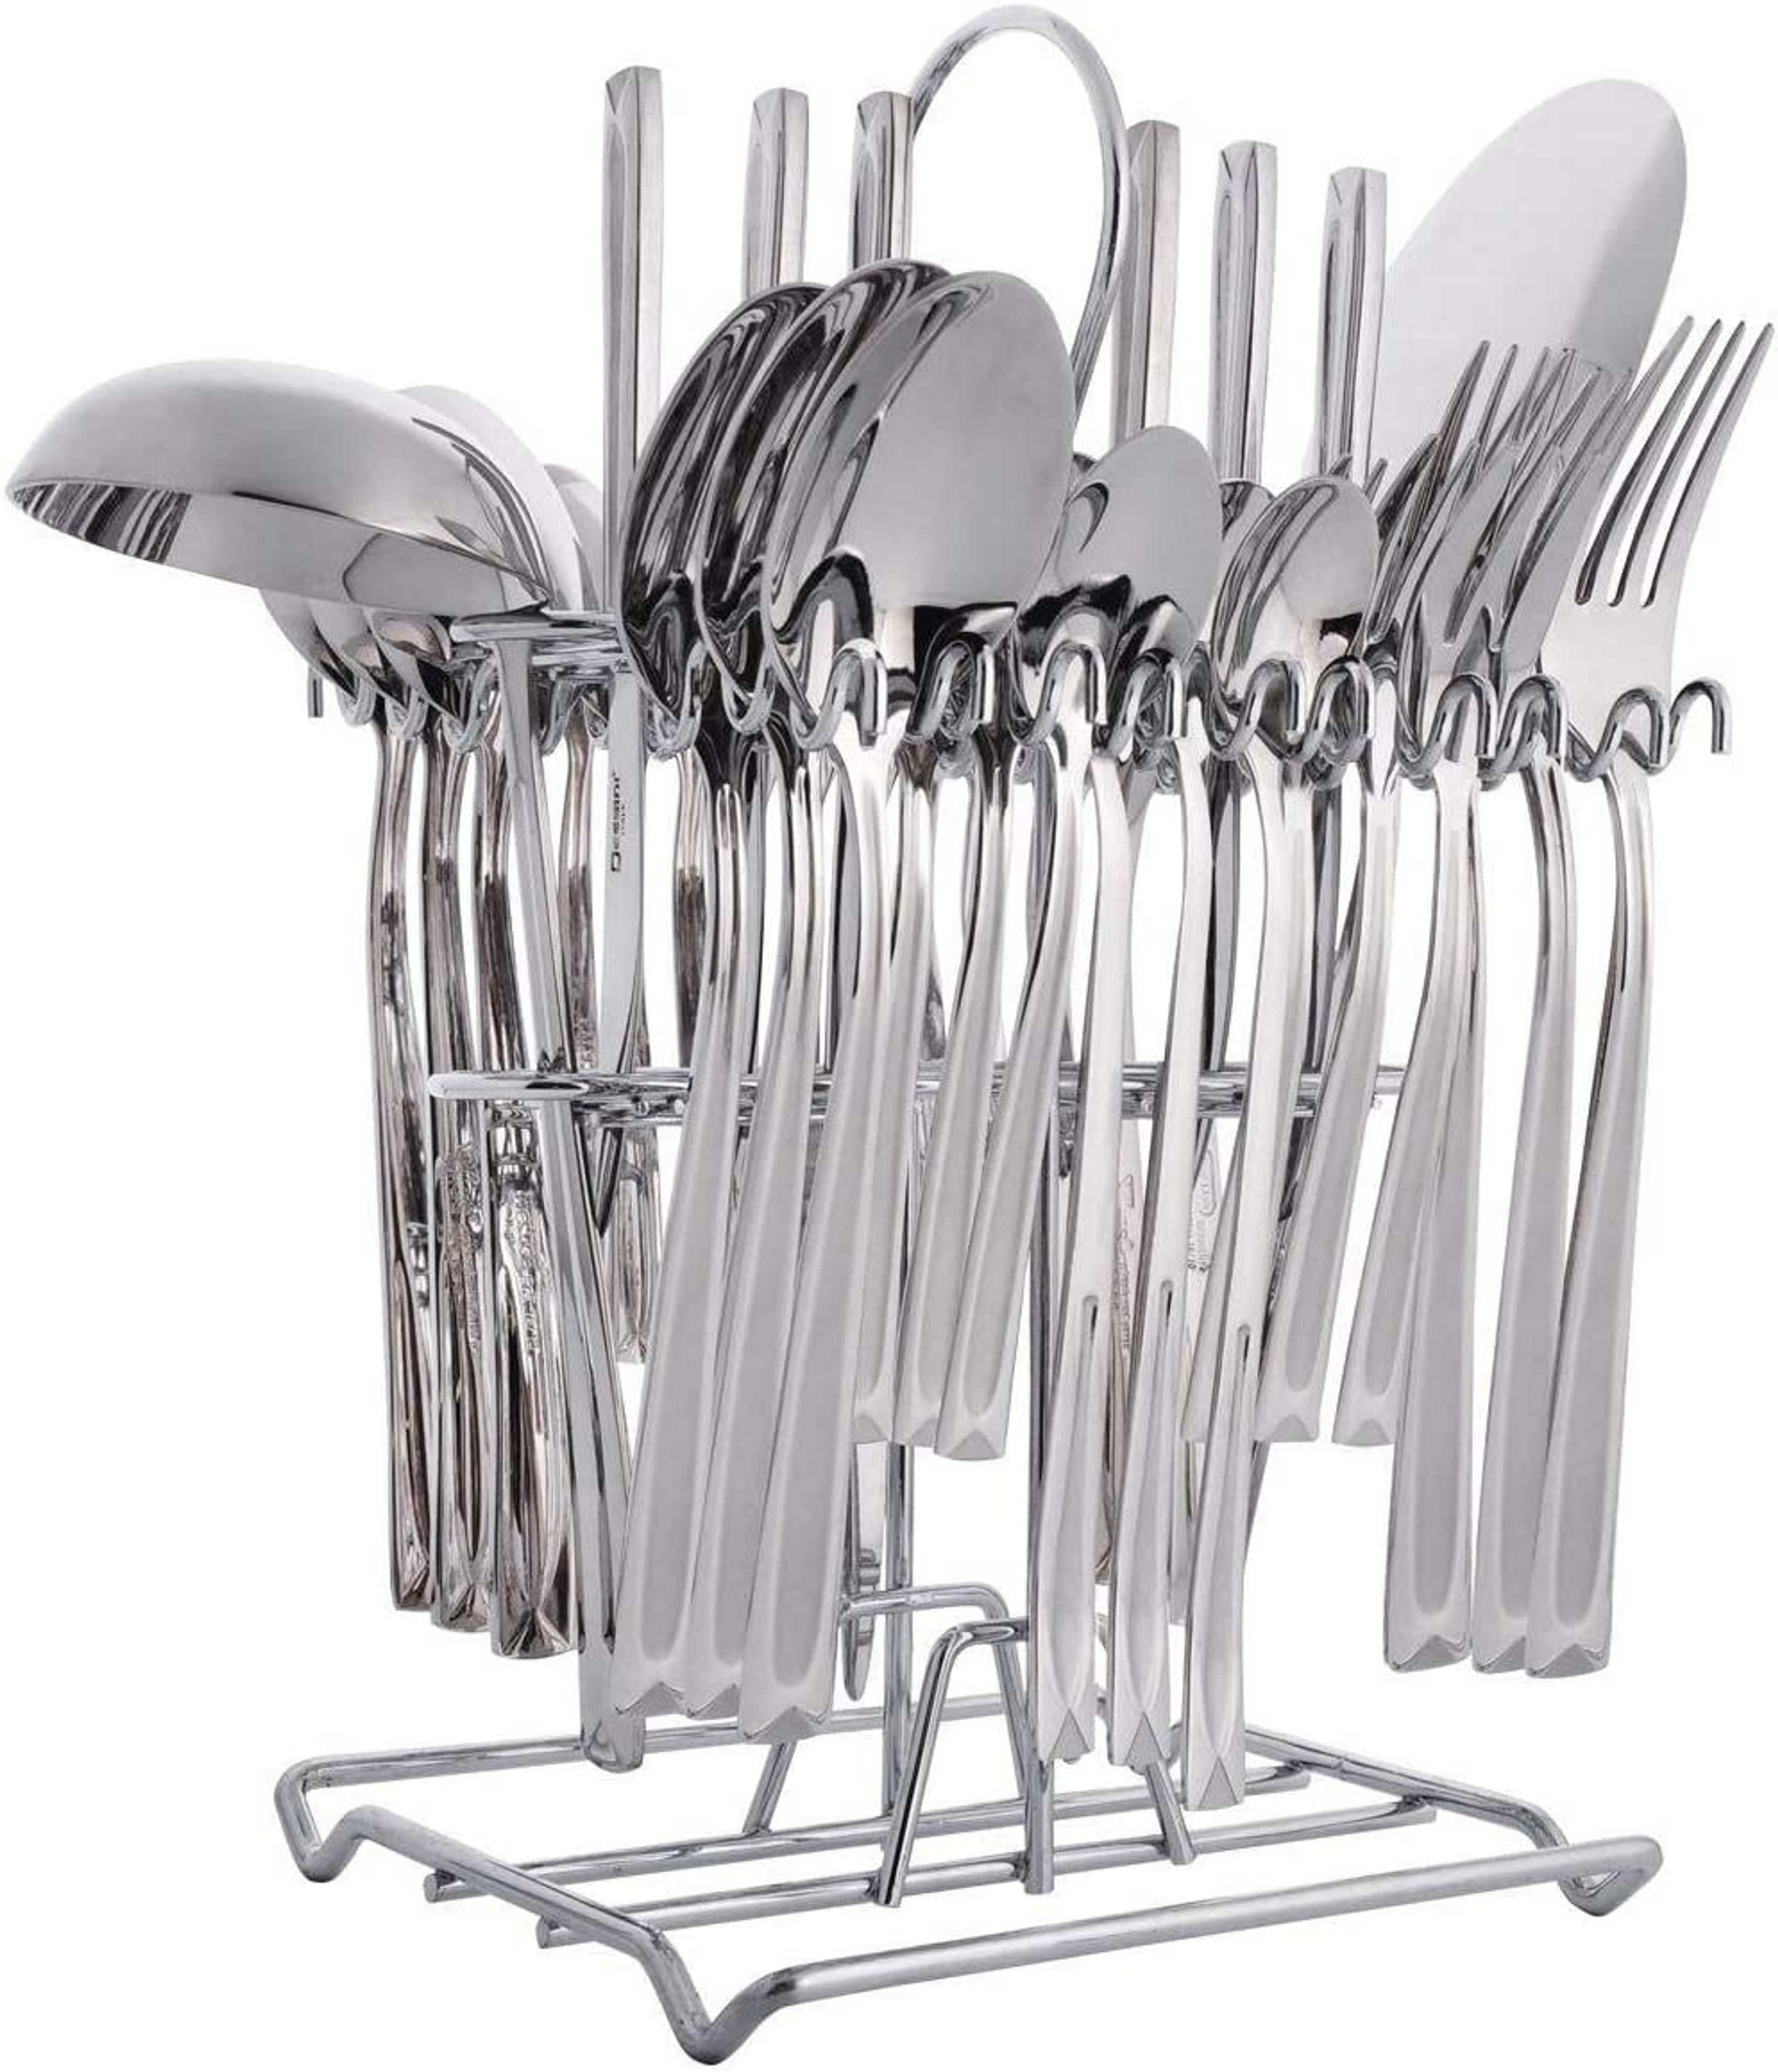 Stainless Steel Cutlery Set 39 PCS Made in Italy